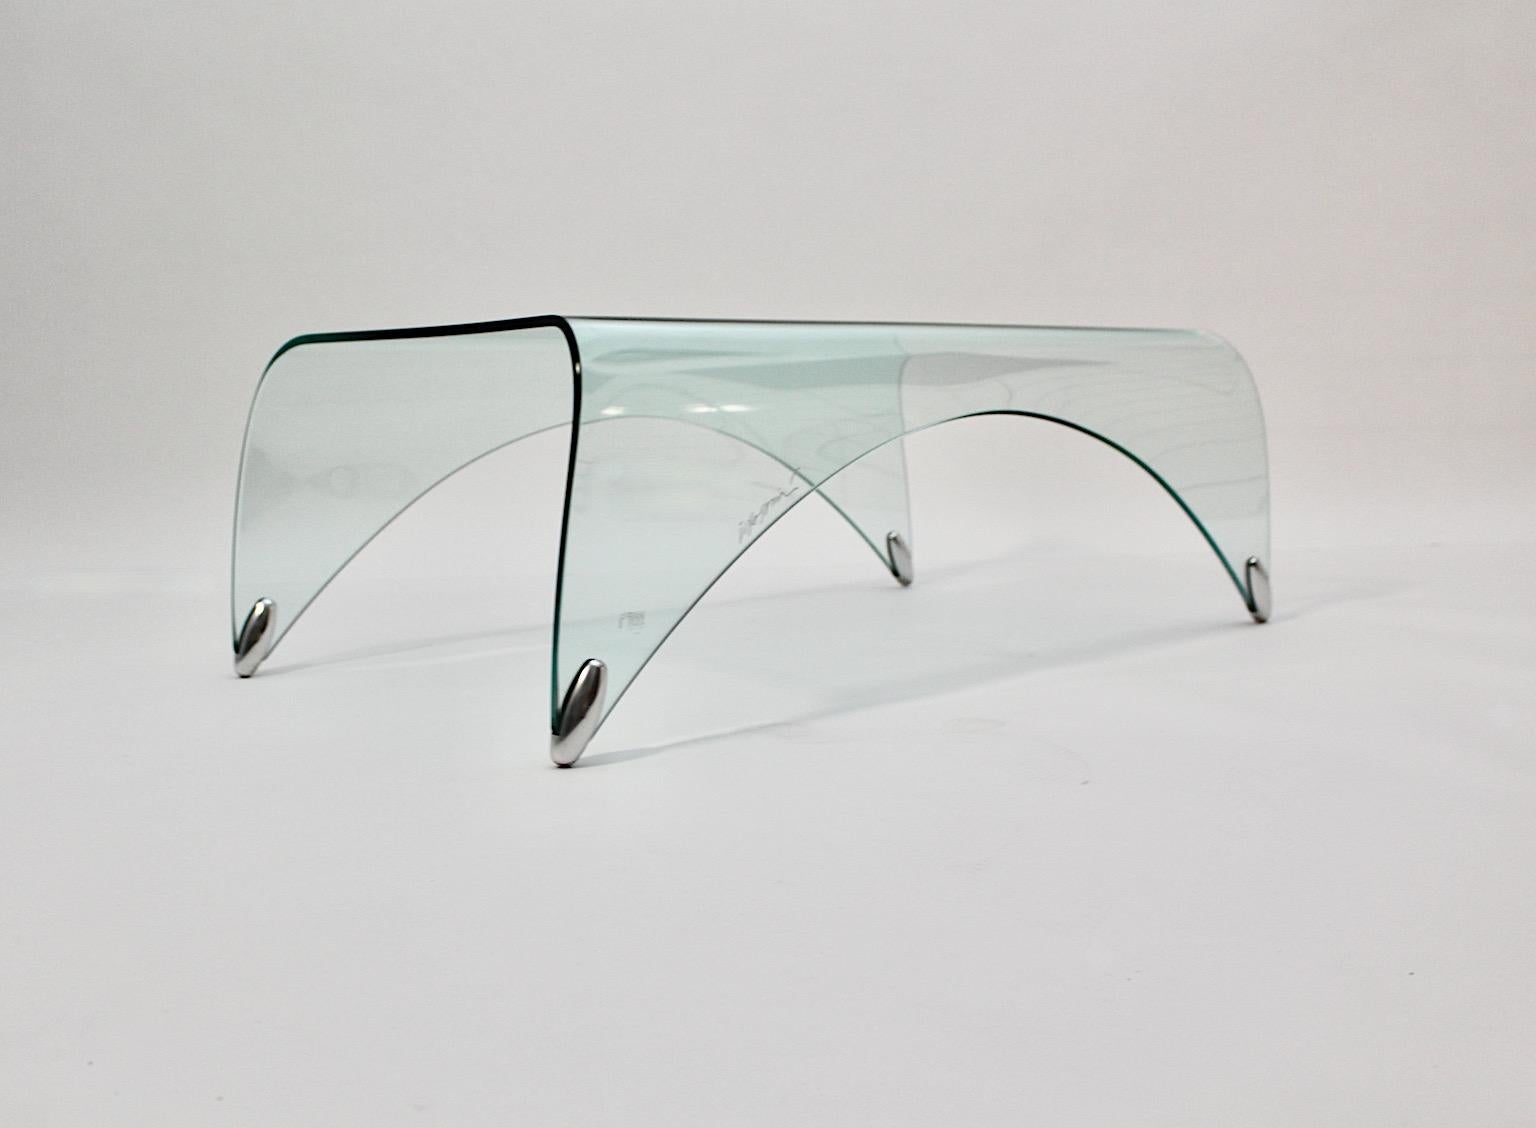 Modern vintage clear glass sofa table or side table by Massimo Iosa Ghini for Fiam, 20th century Italy.
A waterfall like sofa table from clear glass supported with metal feet designed by Massimo Iosa Ghini for Fiam, 20th century, Italy.
This